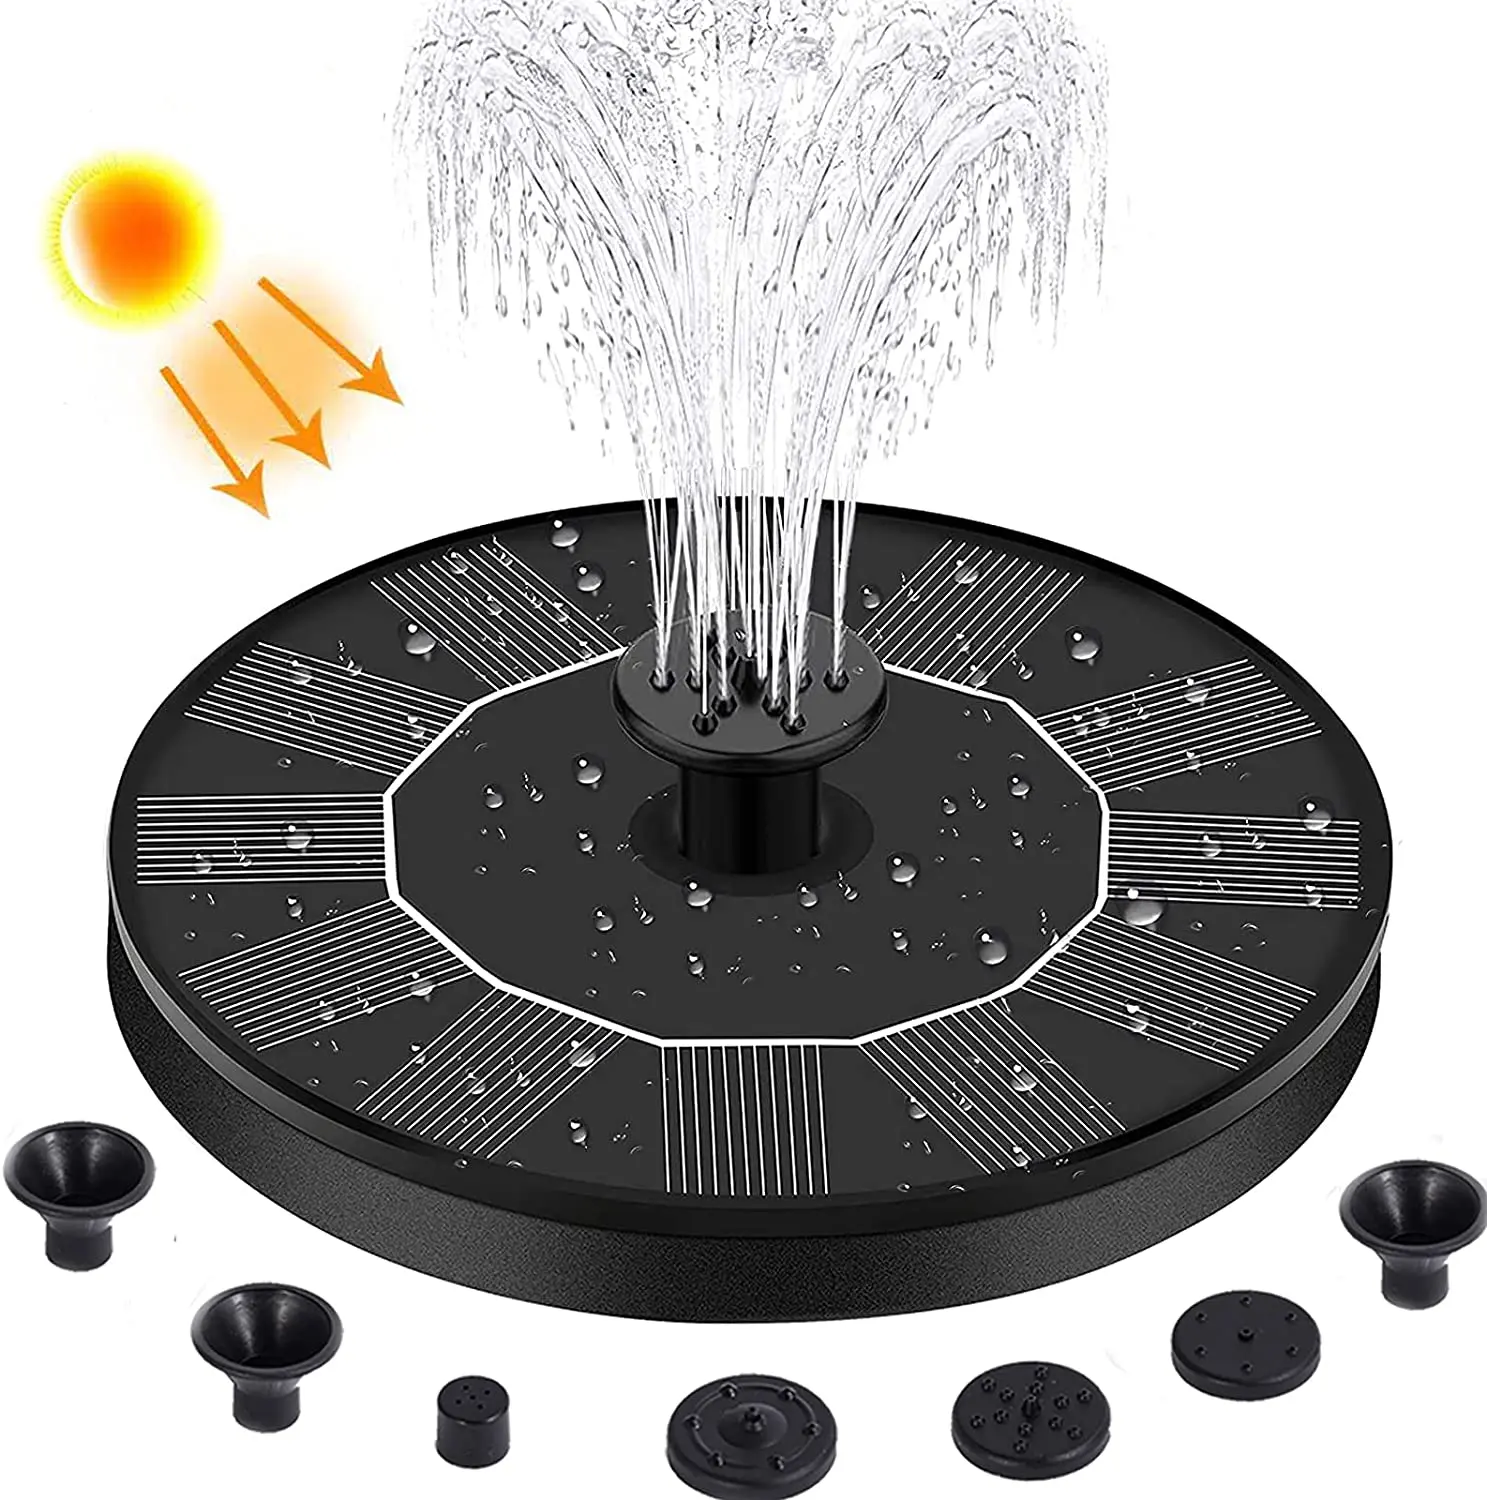 

Solar Powered outdoor garden water fountain with 7 nozzles for pond pool, Black